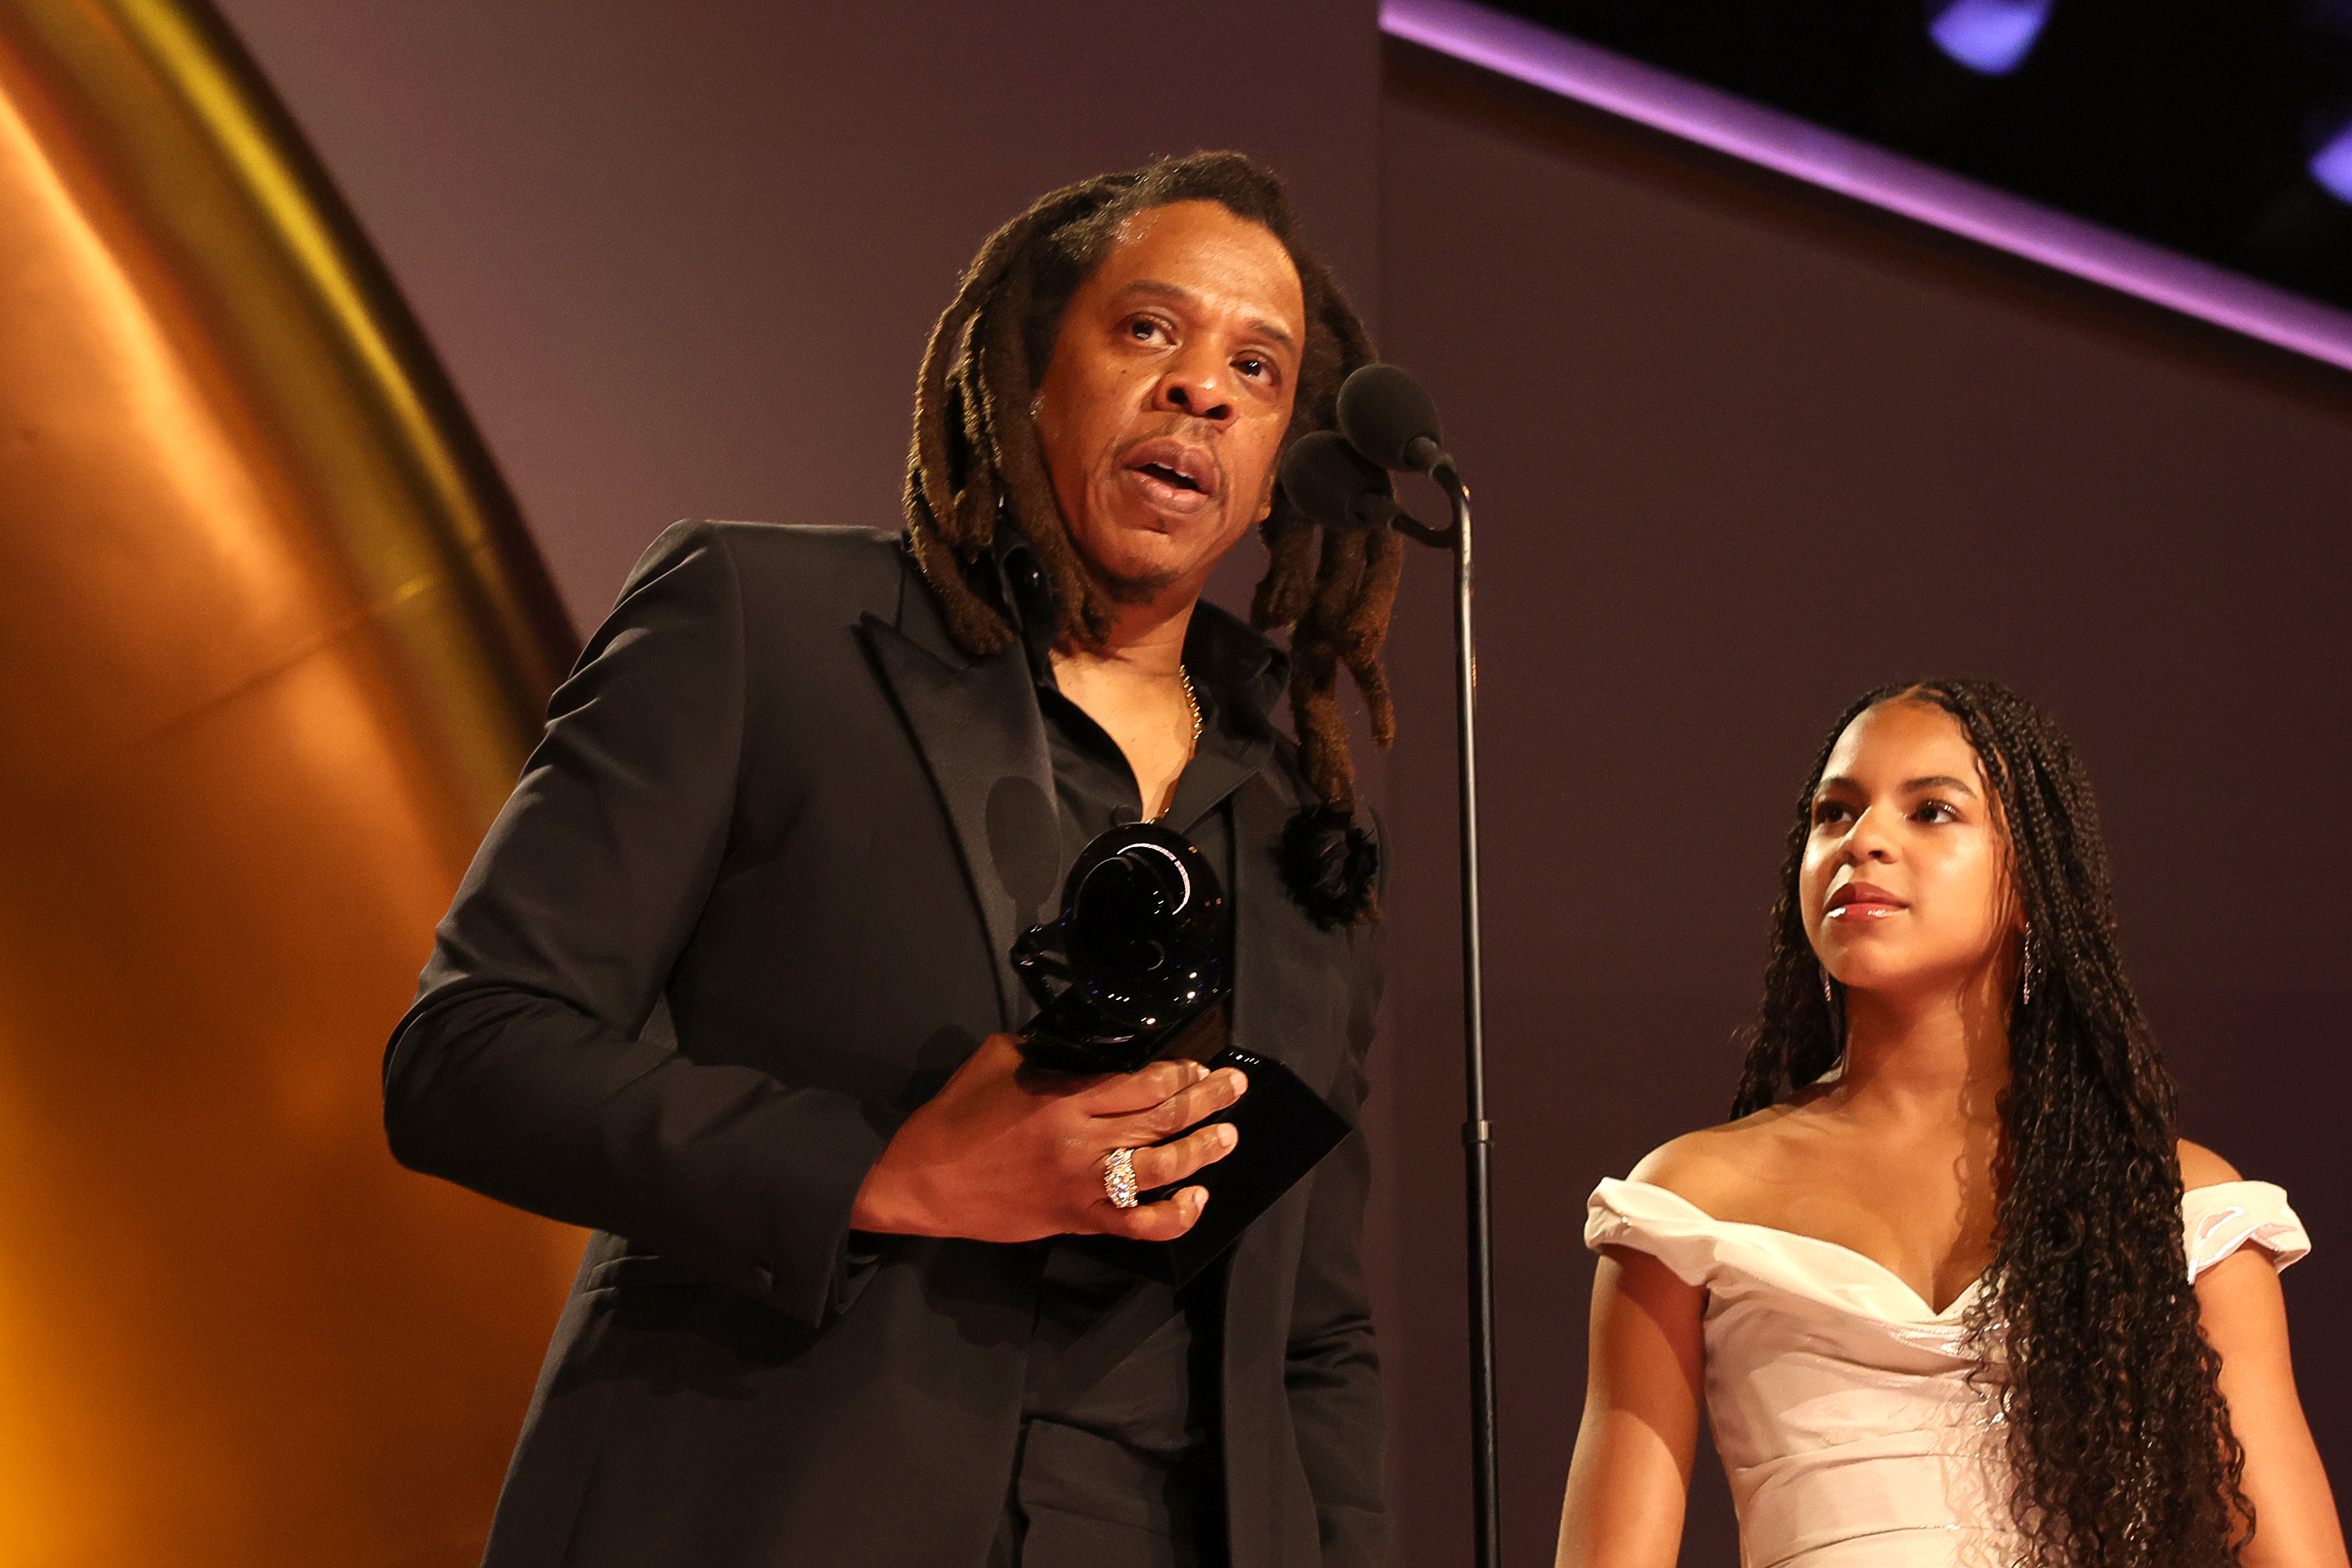 Jay-Z and Blue Ivy onstage at the Grammys